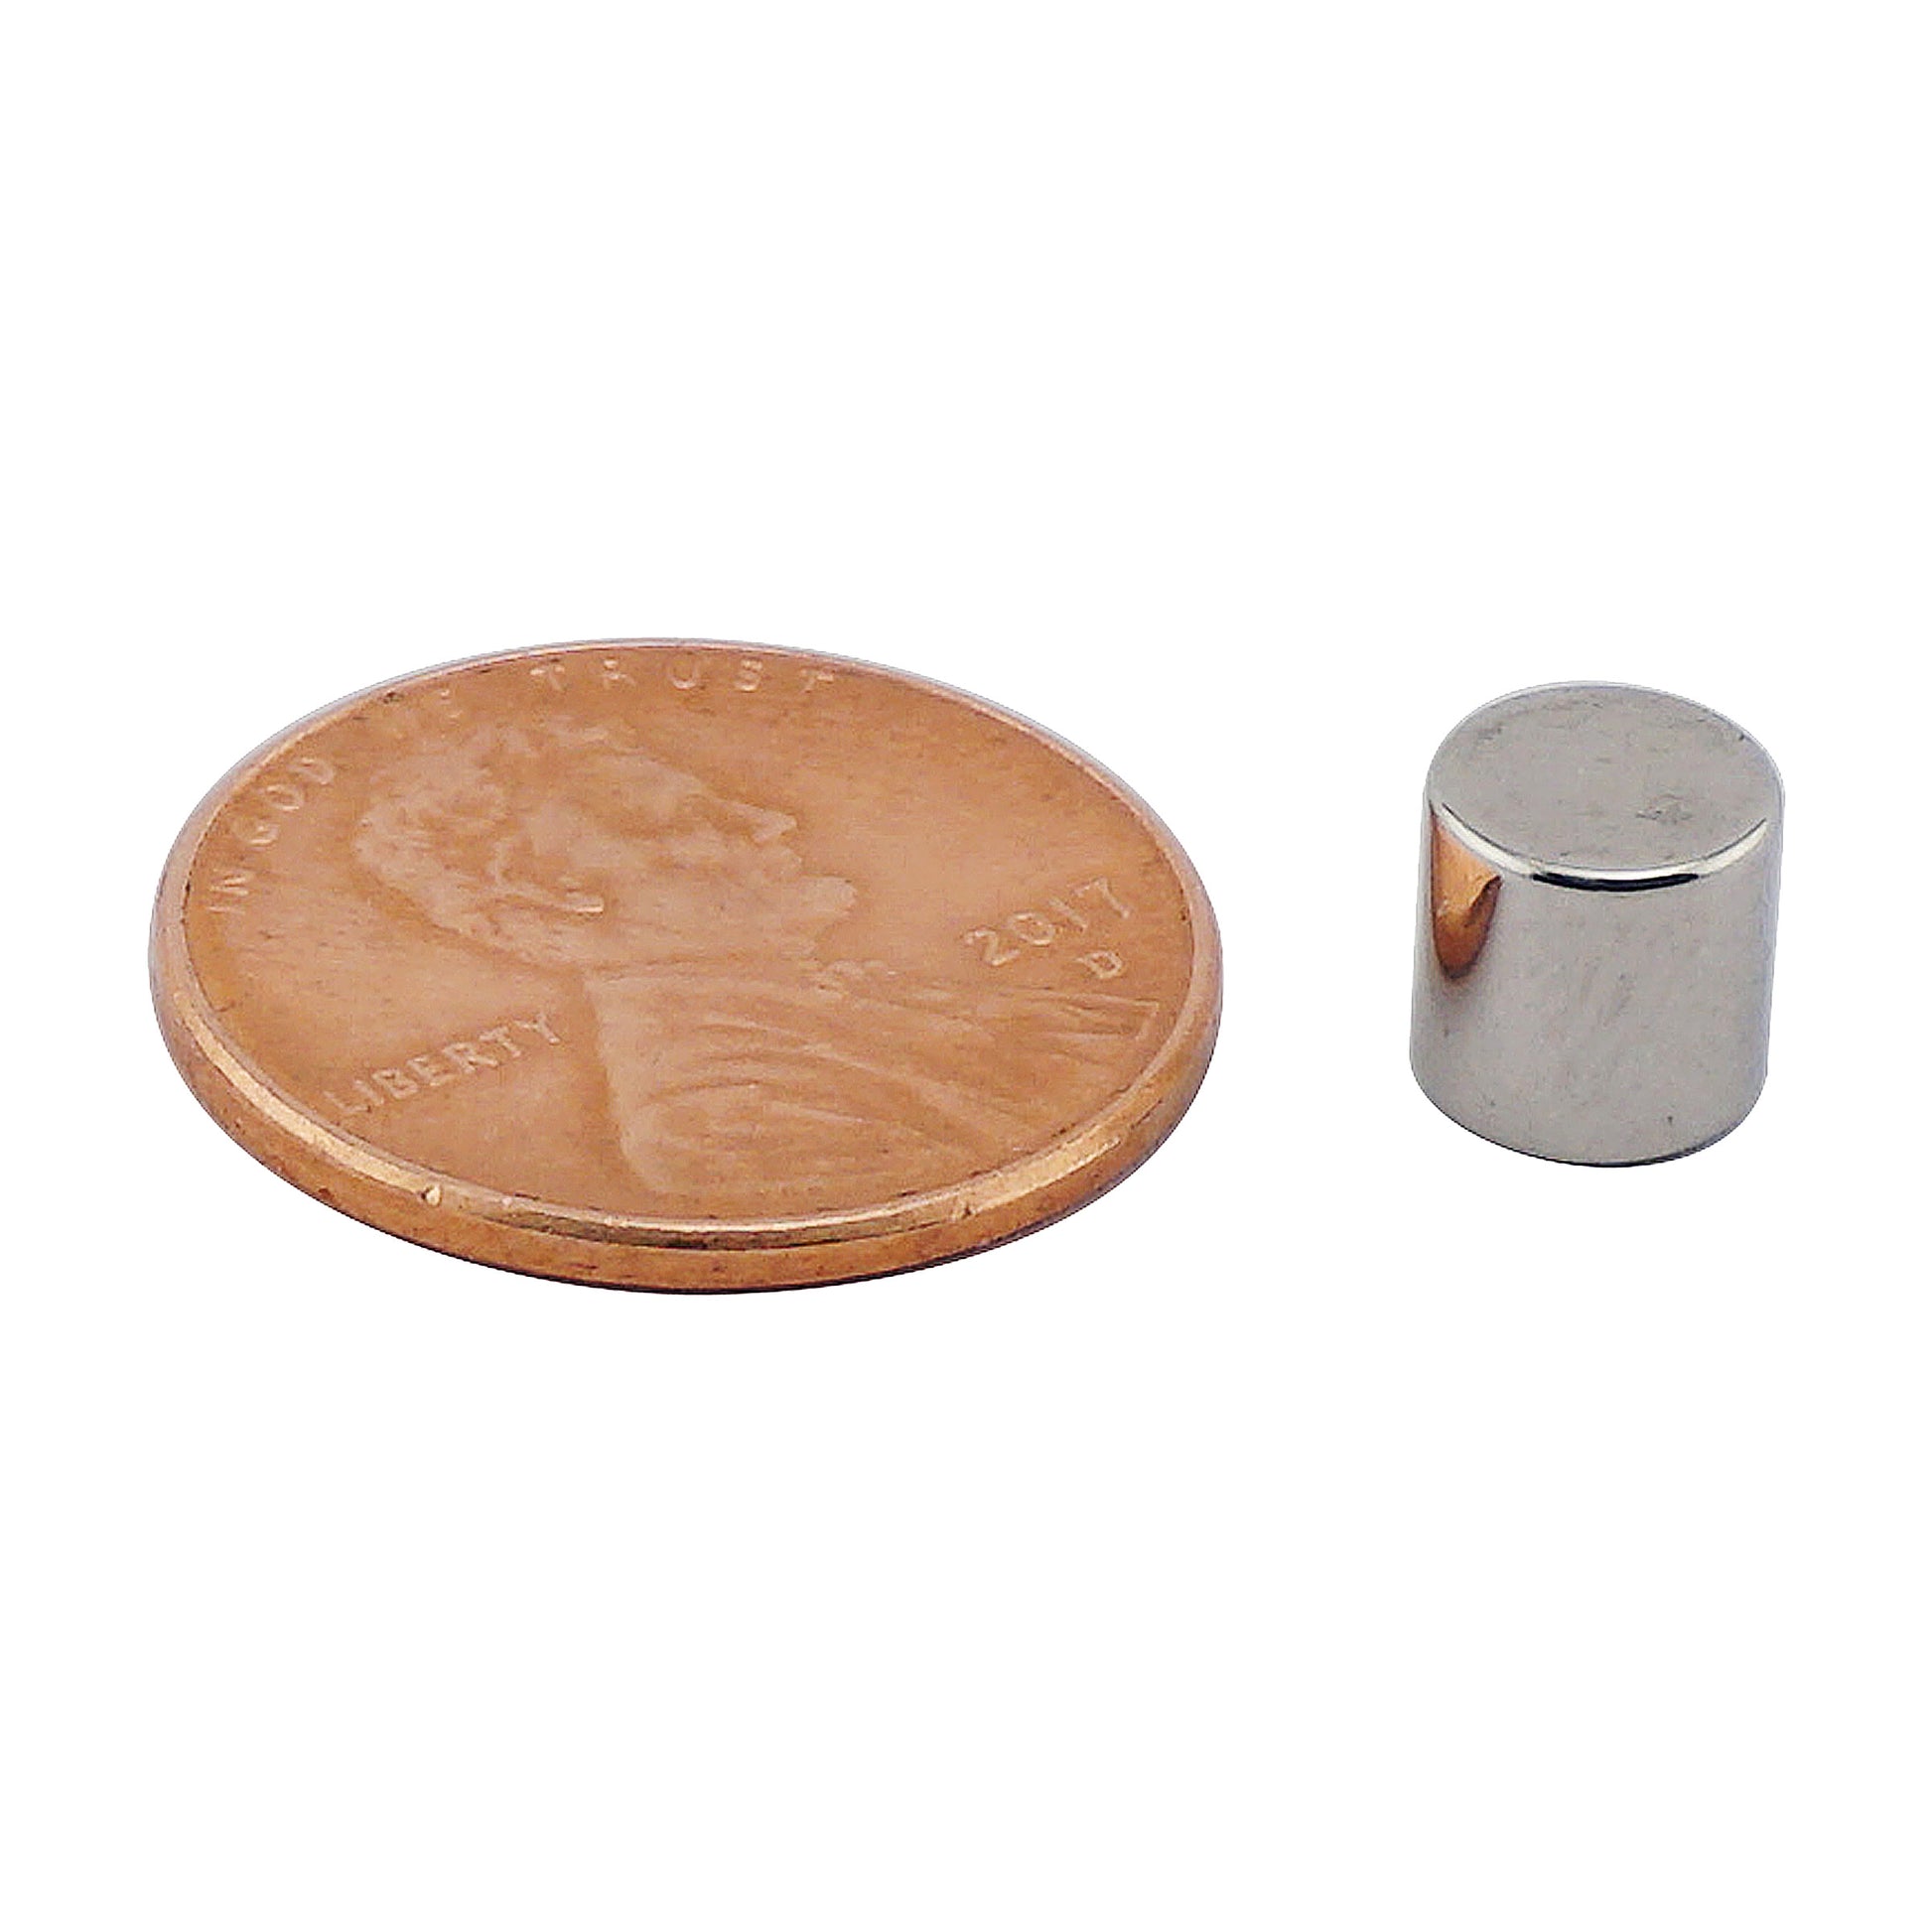 Load image into Gallery viewer, ND45-2525N Neodymium Disc Magnet - Compared to Penny for Size Reference